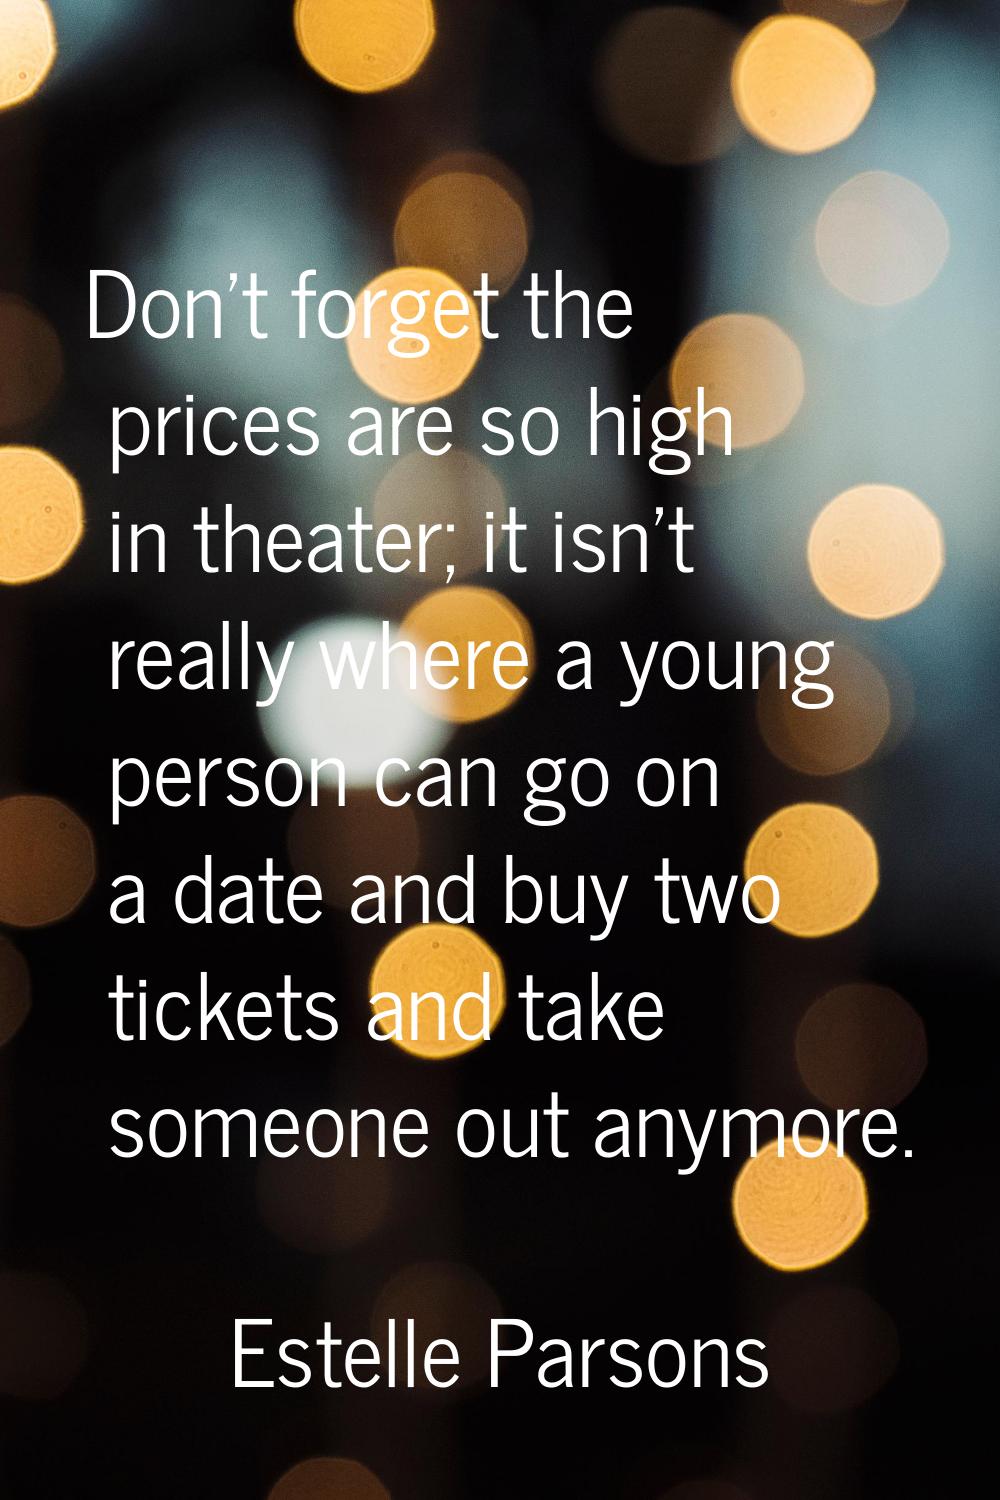 Don't forget the prices are so high in theater; it isn't really where a young person can go on a da